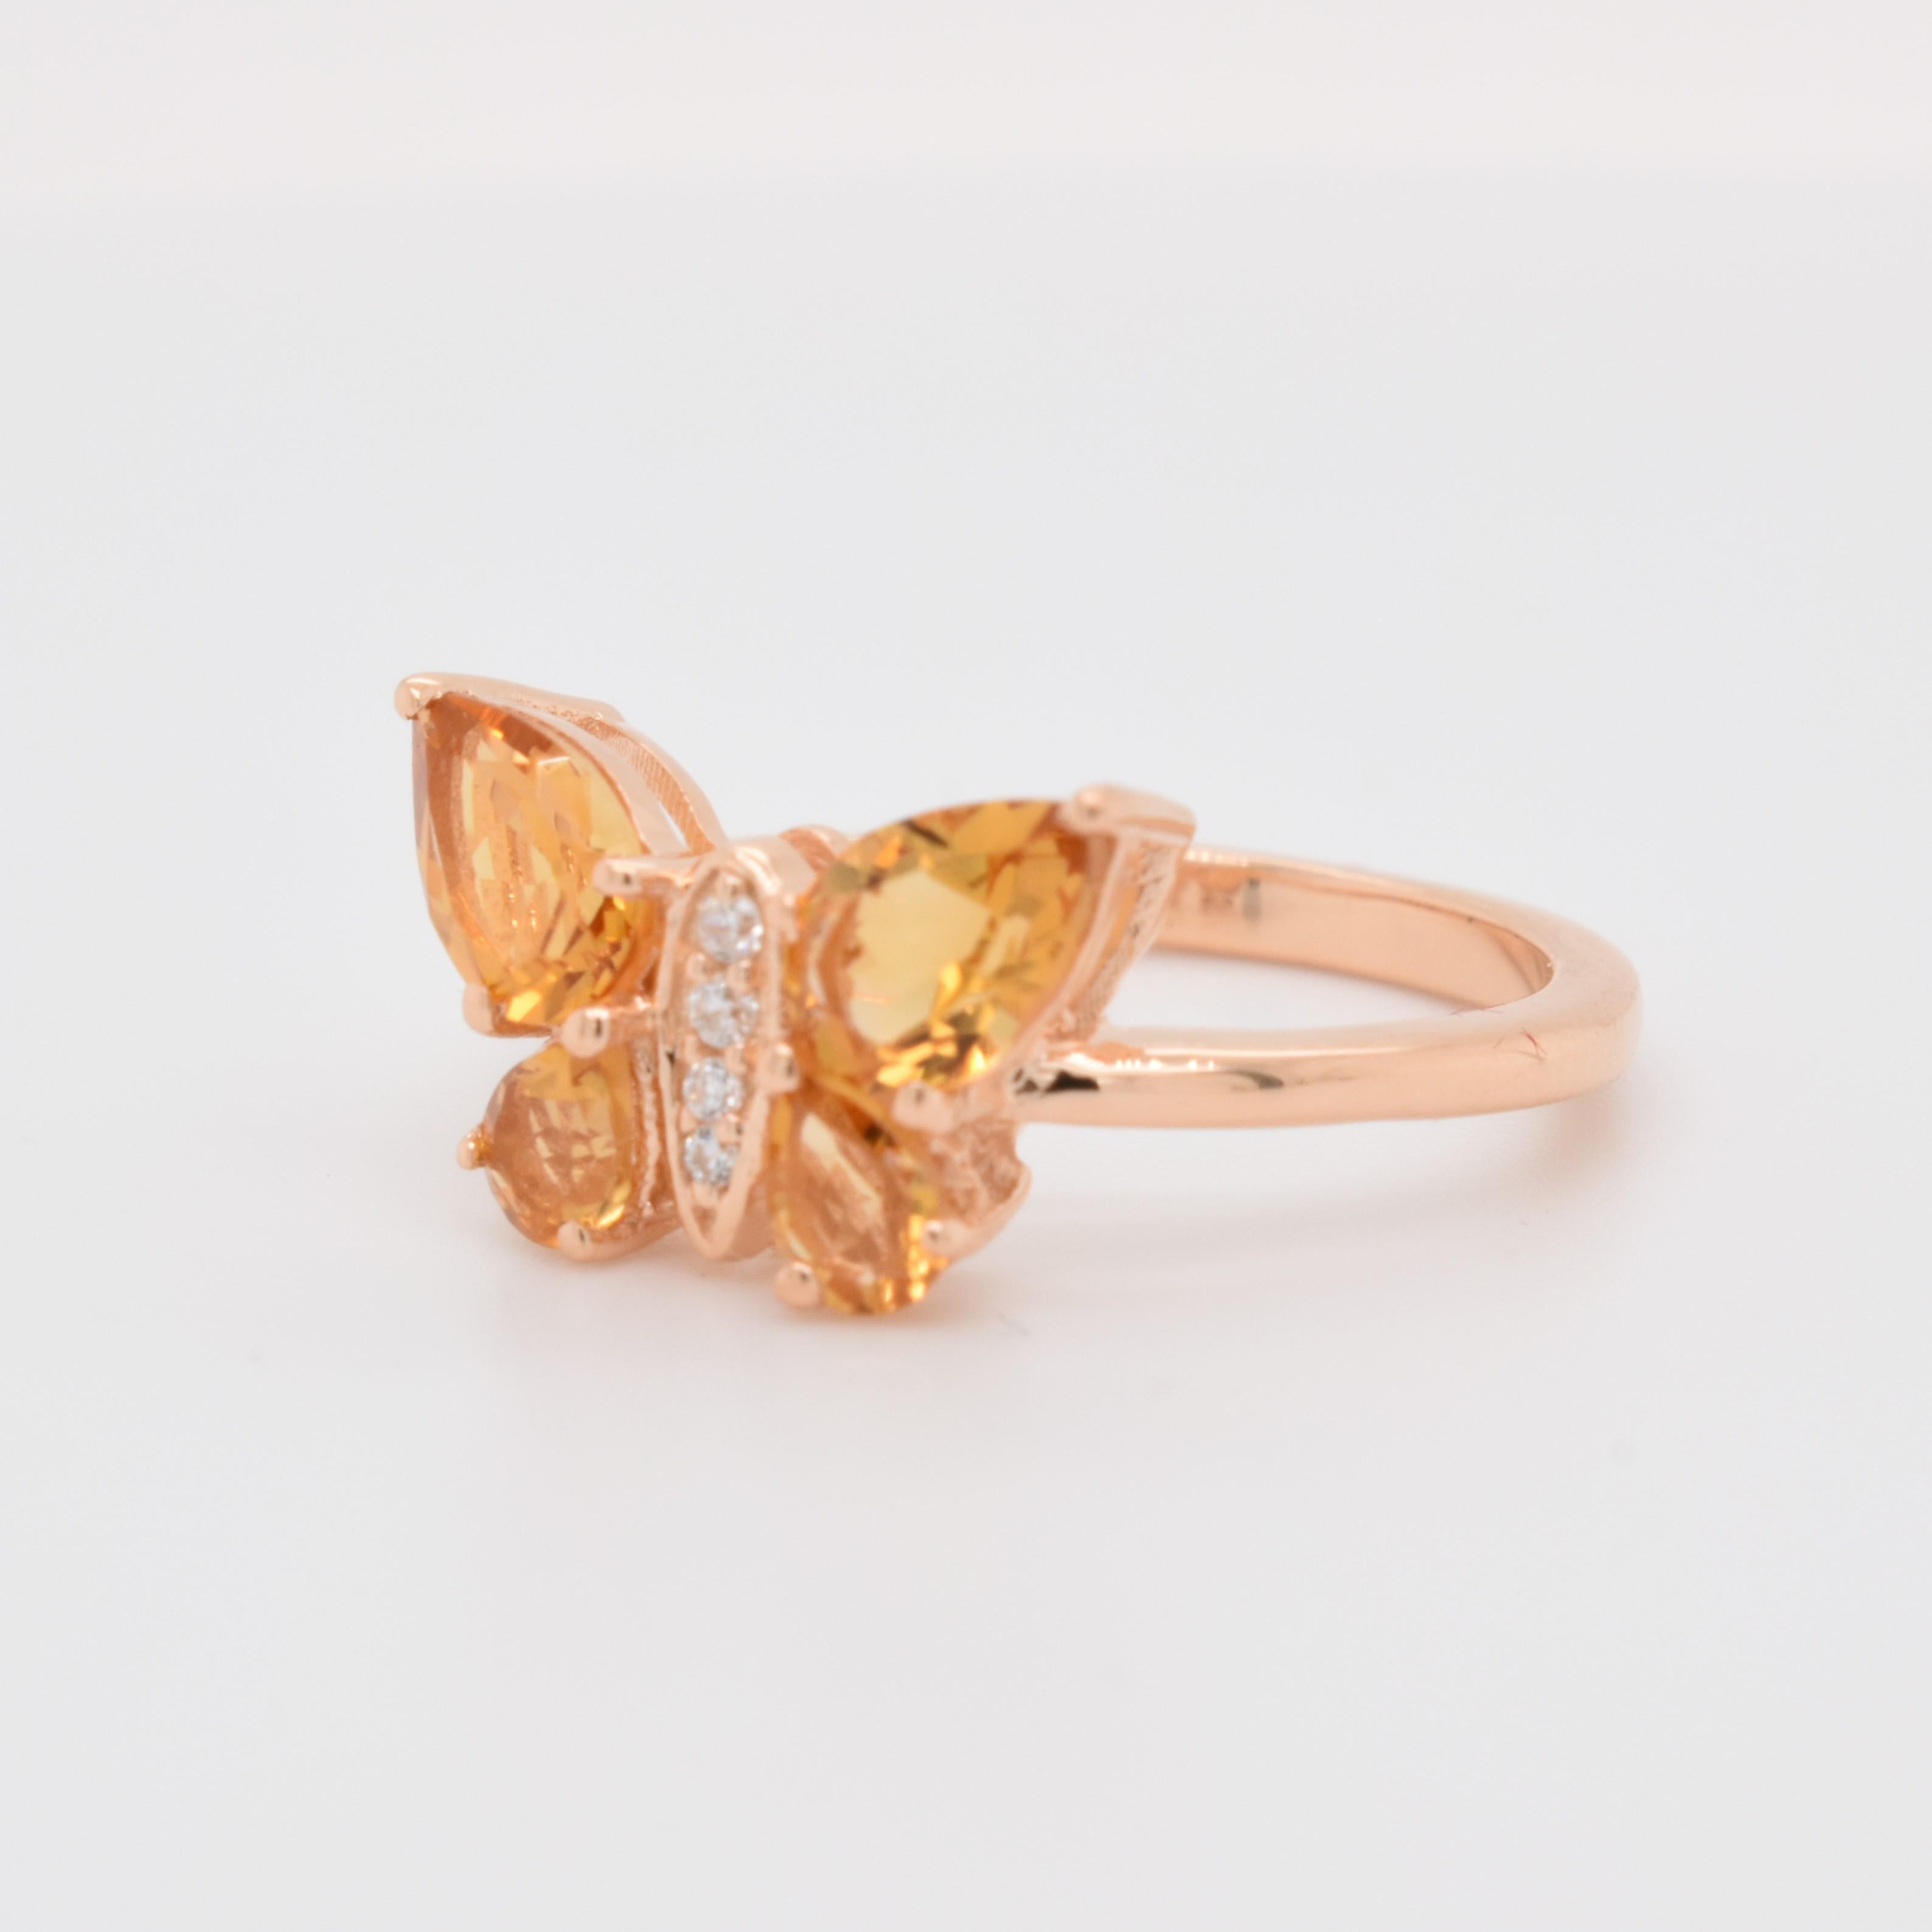 Pear Shape Citrine Gemstone And CZ beautifully crafted  in a Ring. A fiery Yellow Color November Birthstone. For a special occasion like Engagement or Proposal or may be as a gift for a special person.

Primary Stone Size - 6x4 & 4x3 mm